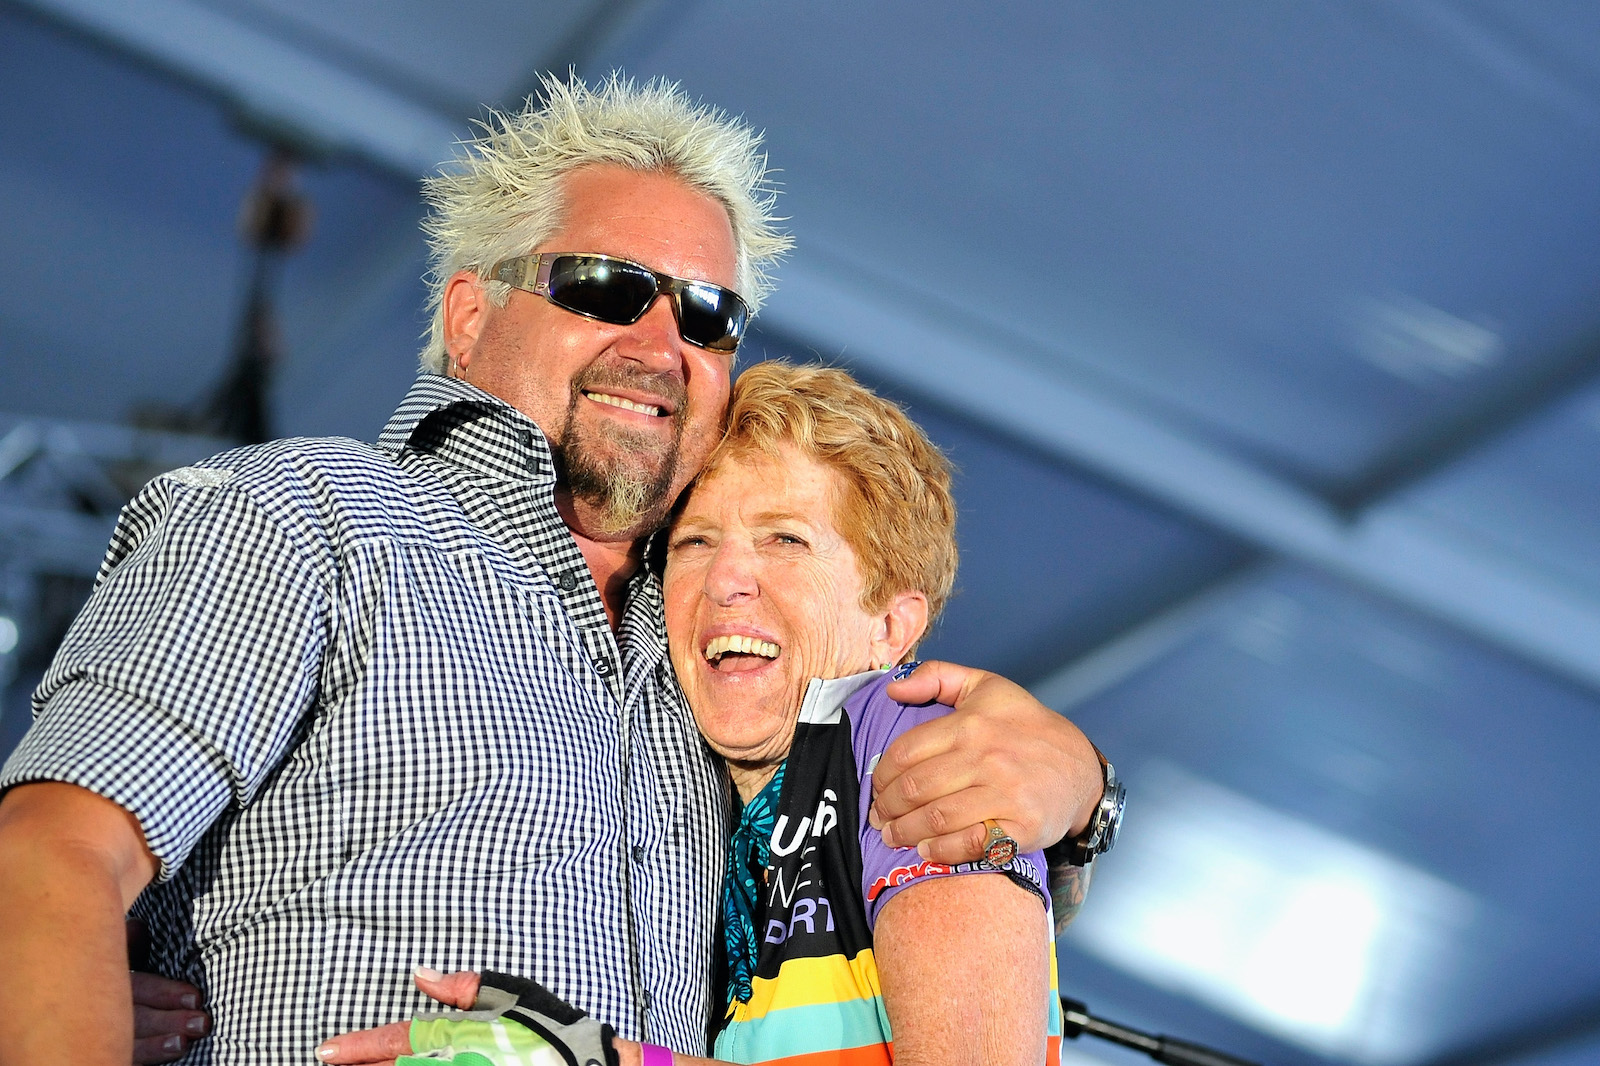 Guy Fieri and mom Penelope Ferry speak on stage at the Finish Line and Victory Celebration Party during the Best Buddies Challenge: Hyannis Port 2015